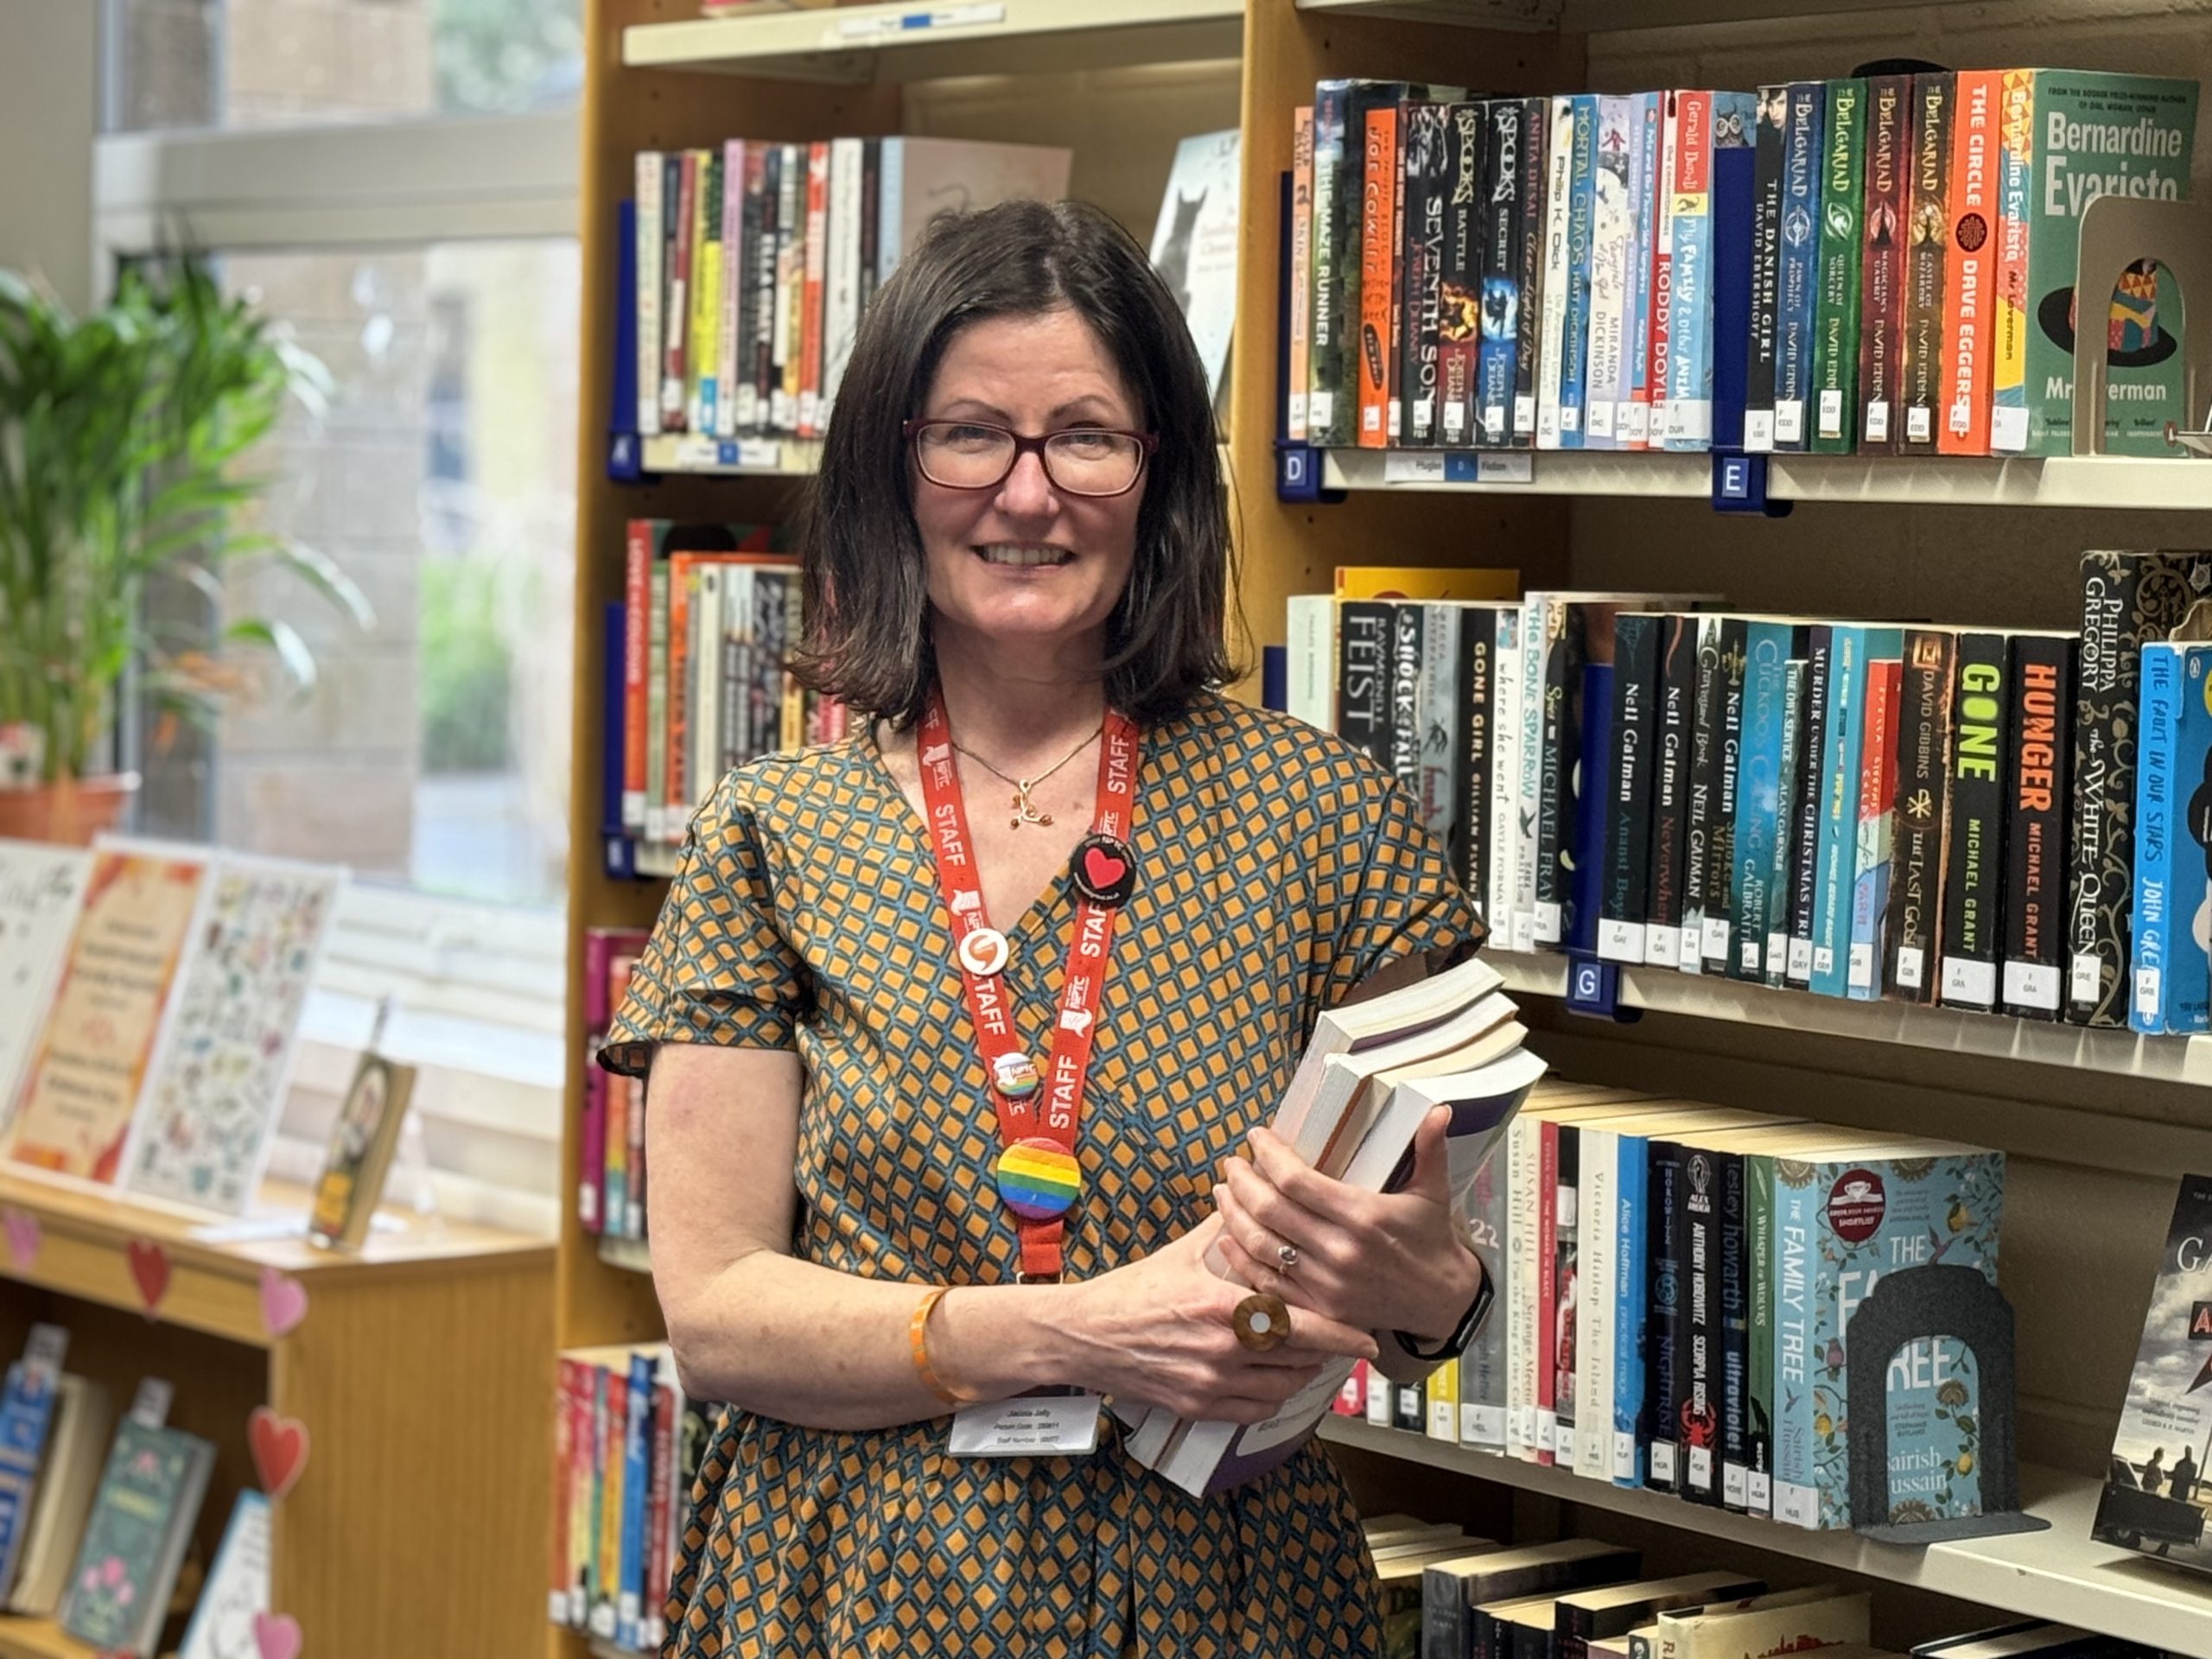 Library staff member Jacinta Jolly holding some books